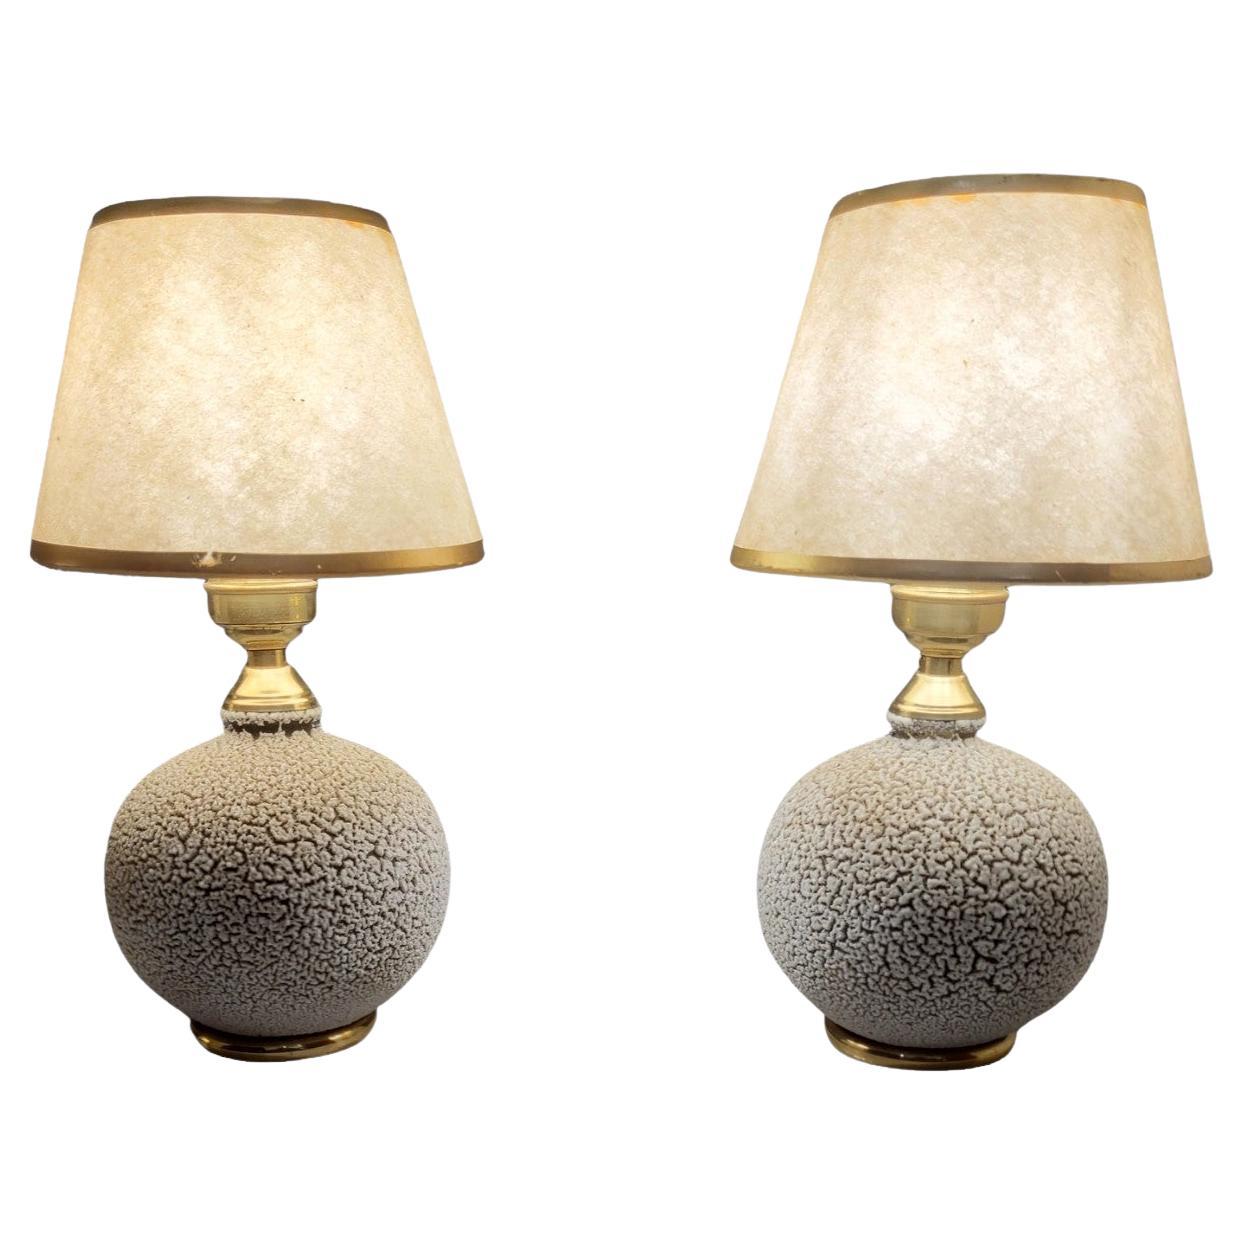 Paul Milet Style French Art Deco Table Lamps, 1930s For Sale